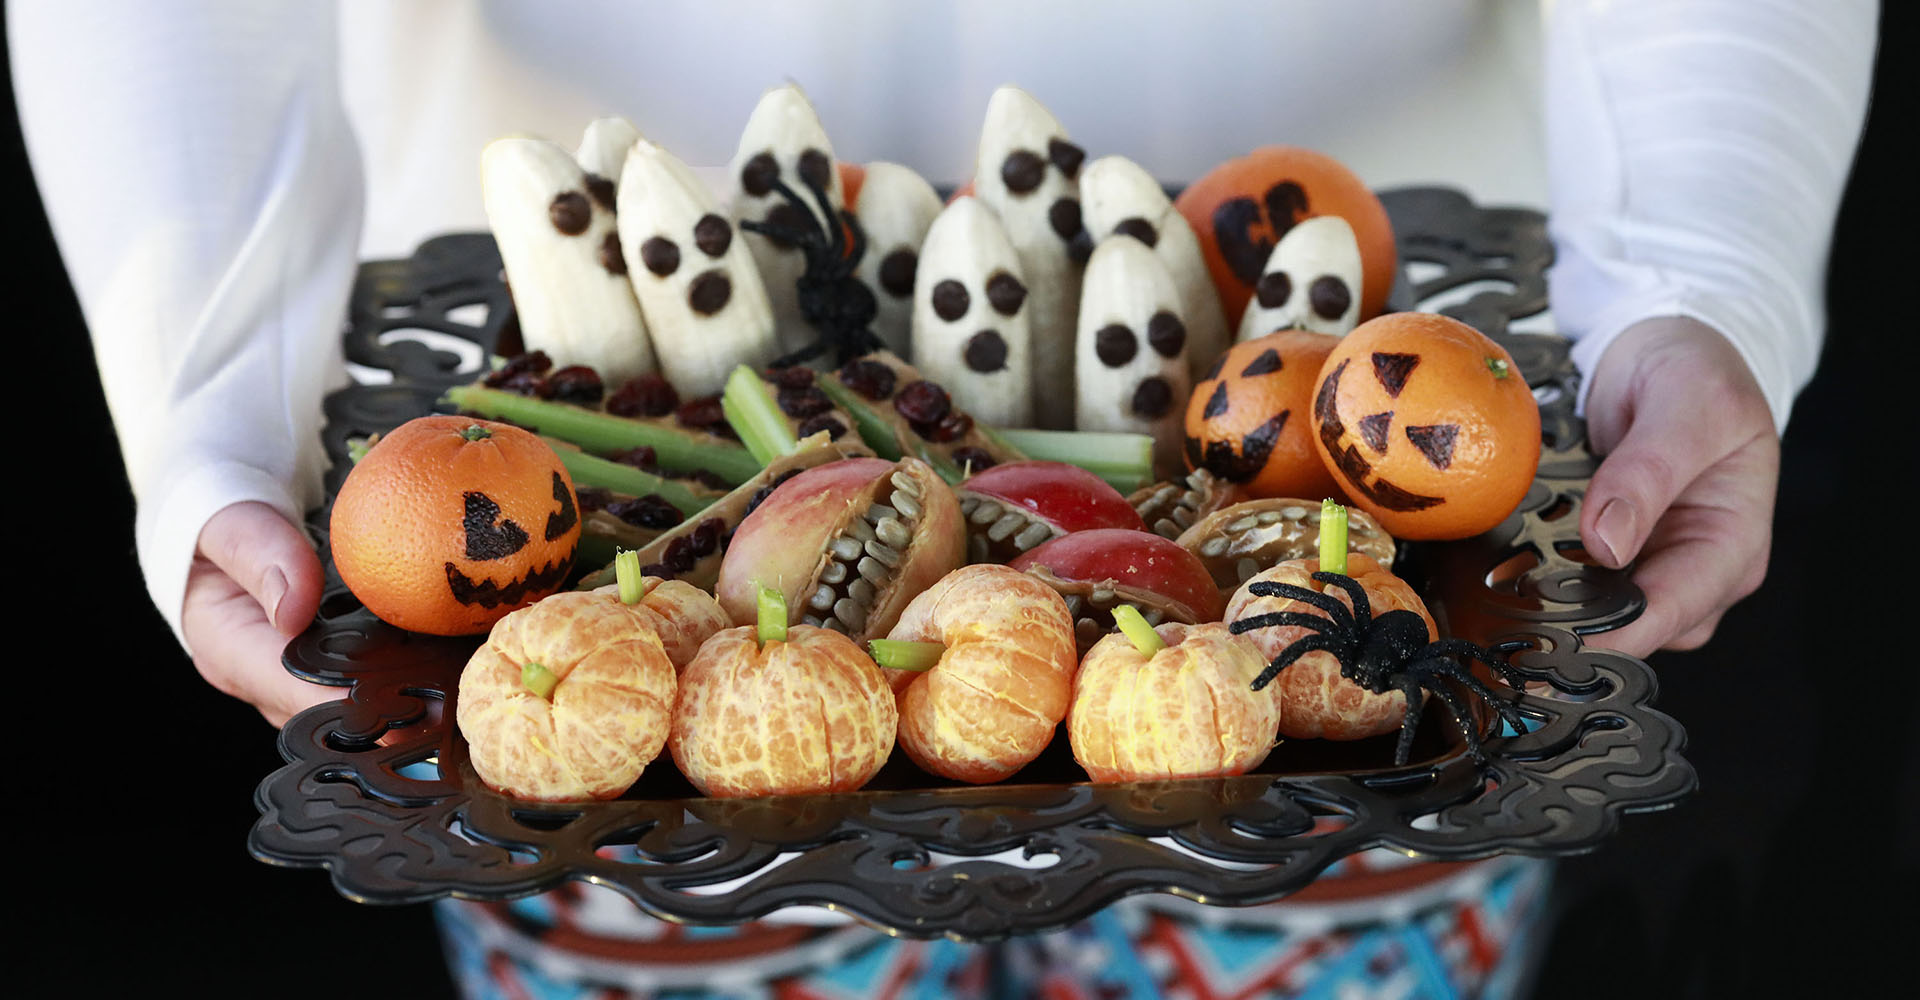 7 tips for a healthy Halloween